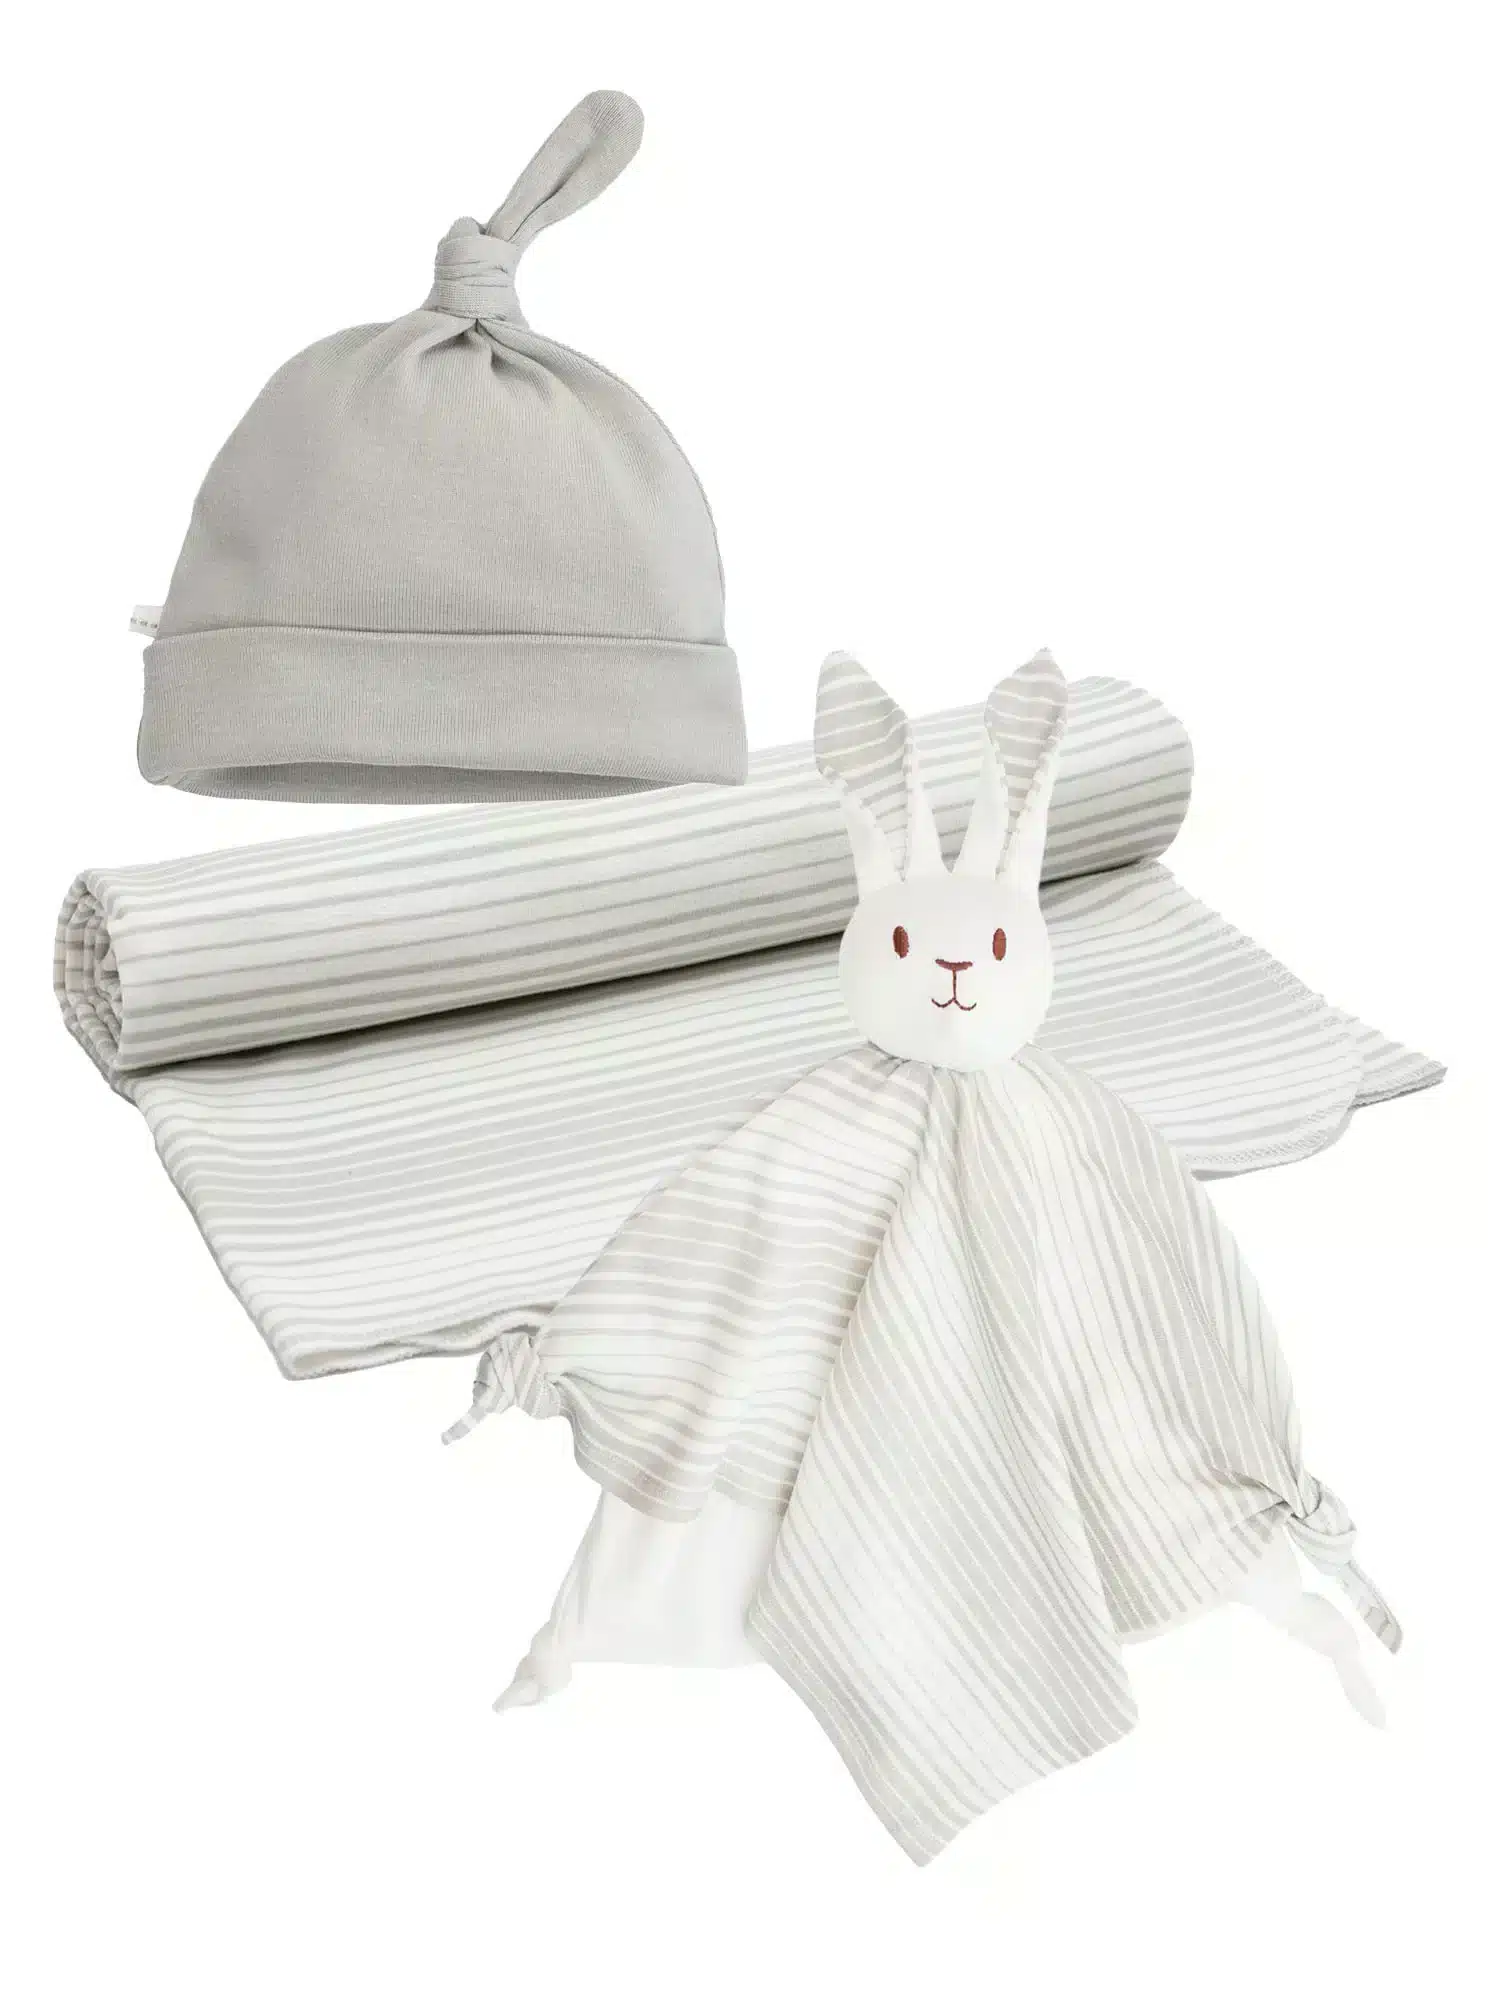 Under the Nile Gray Stripe Bunny Blanket Friend, Beanie, Swaddle Gift Bag Set from Gimme the Good Stuff